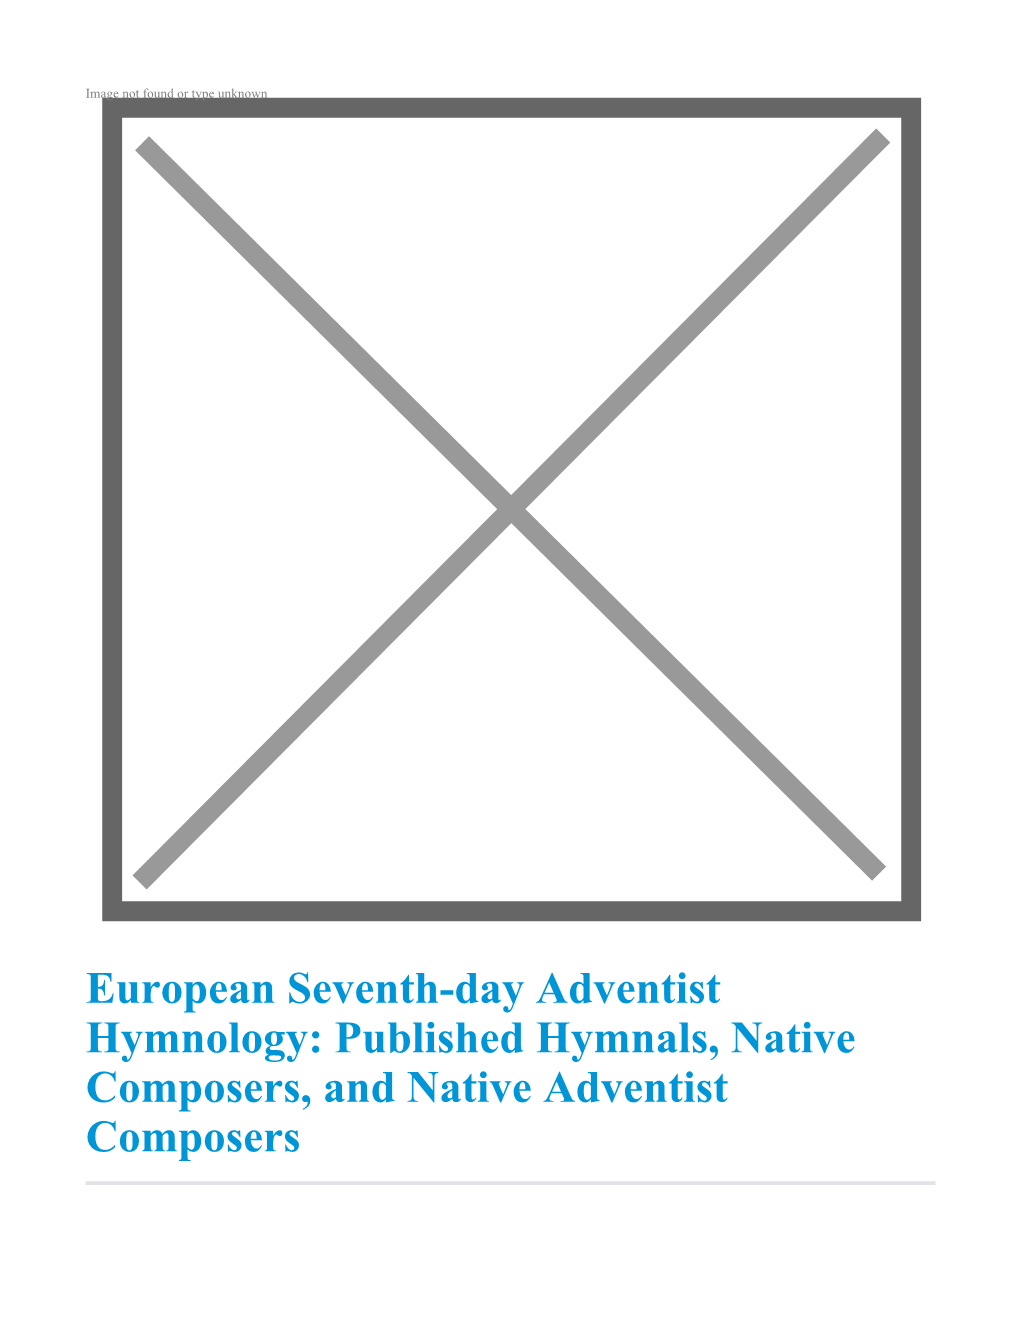 European Seventh-Day Adventist Hymnology: Published Hymnals, Native Composers, and Native Adventist Composers JÓN HJÖRLEIFUR STEFÁNSSON